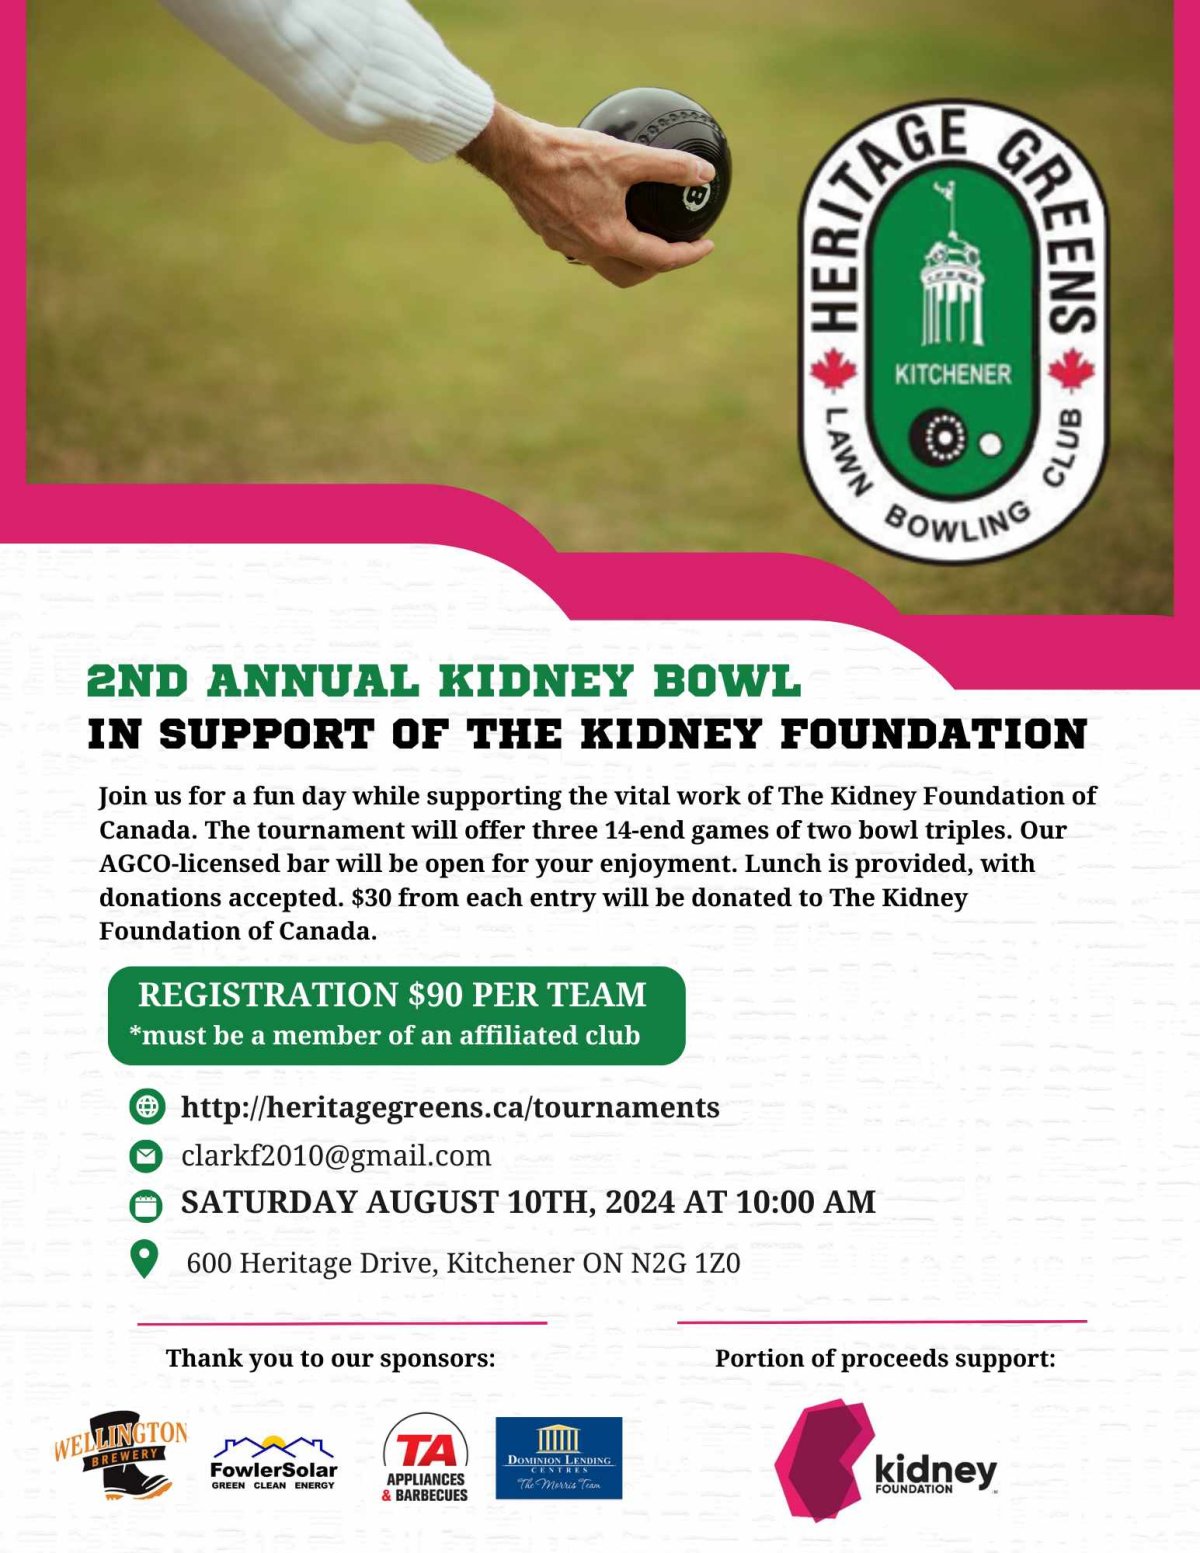 2nd Annual Kidney Bowl – Heritage Greens – Kidney Foundation - image